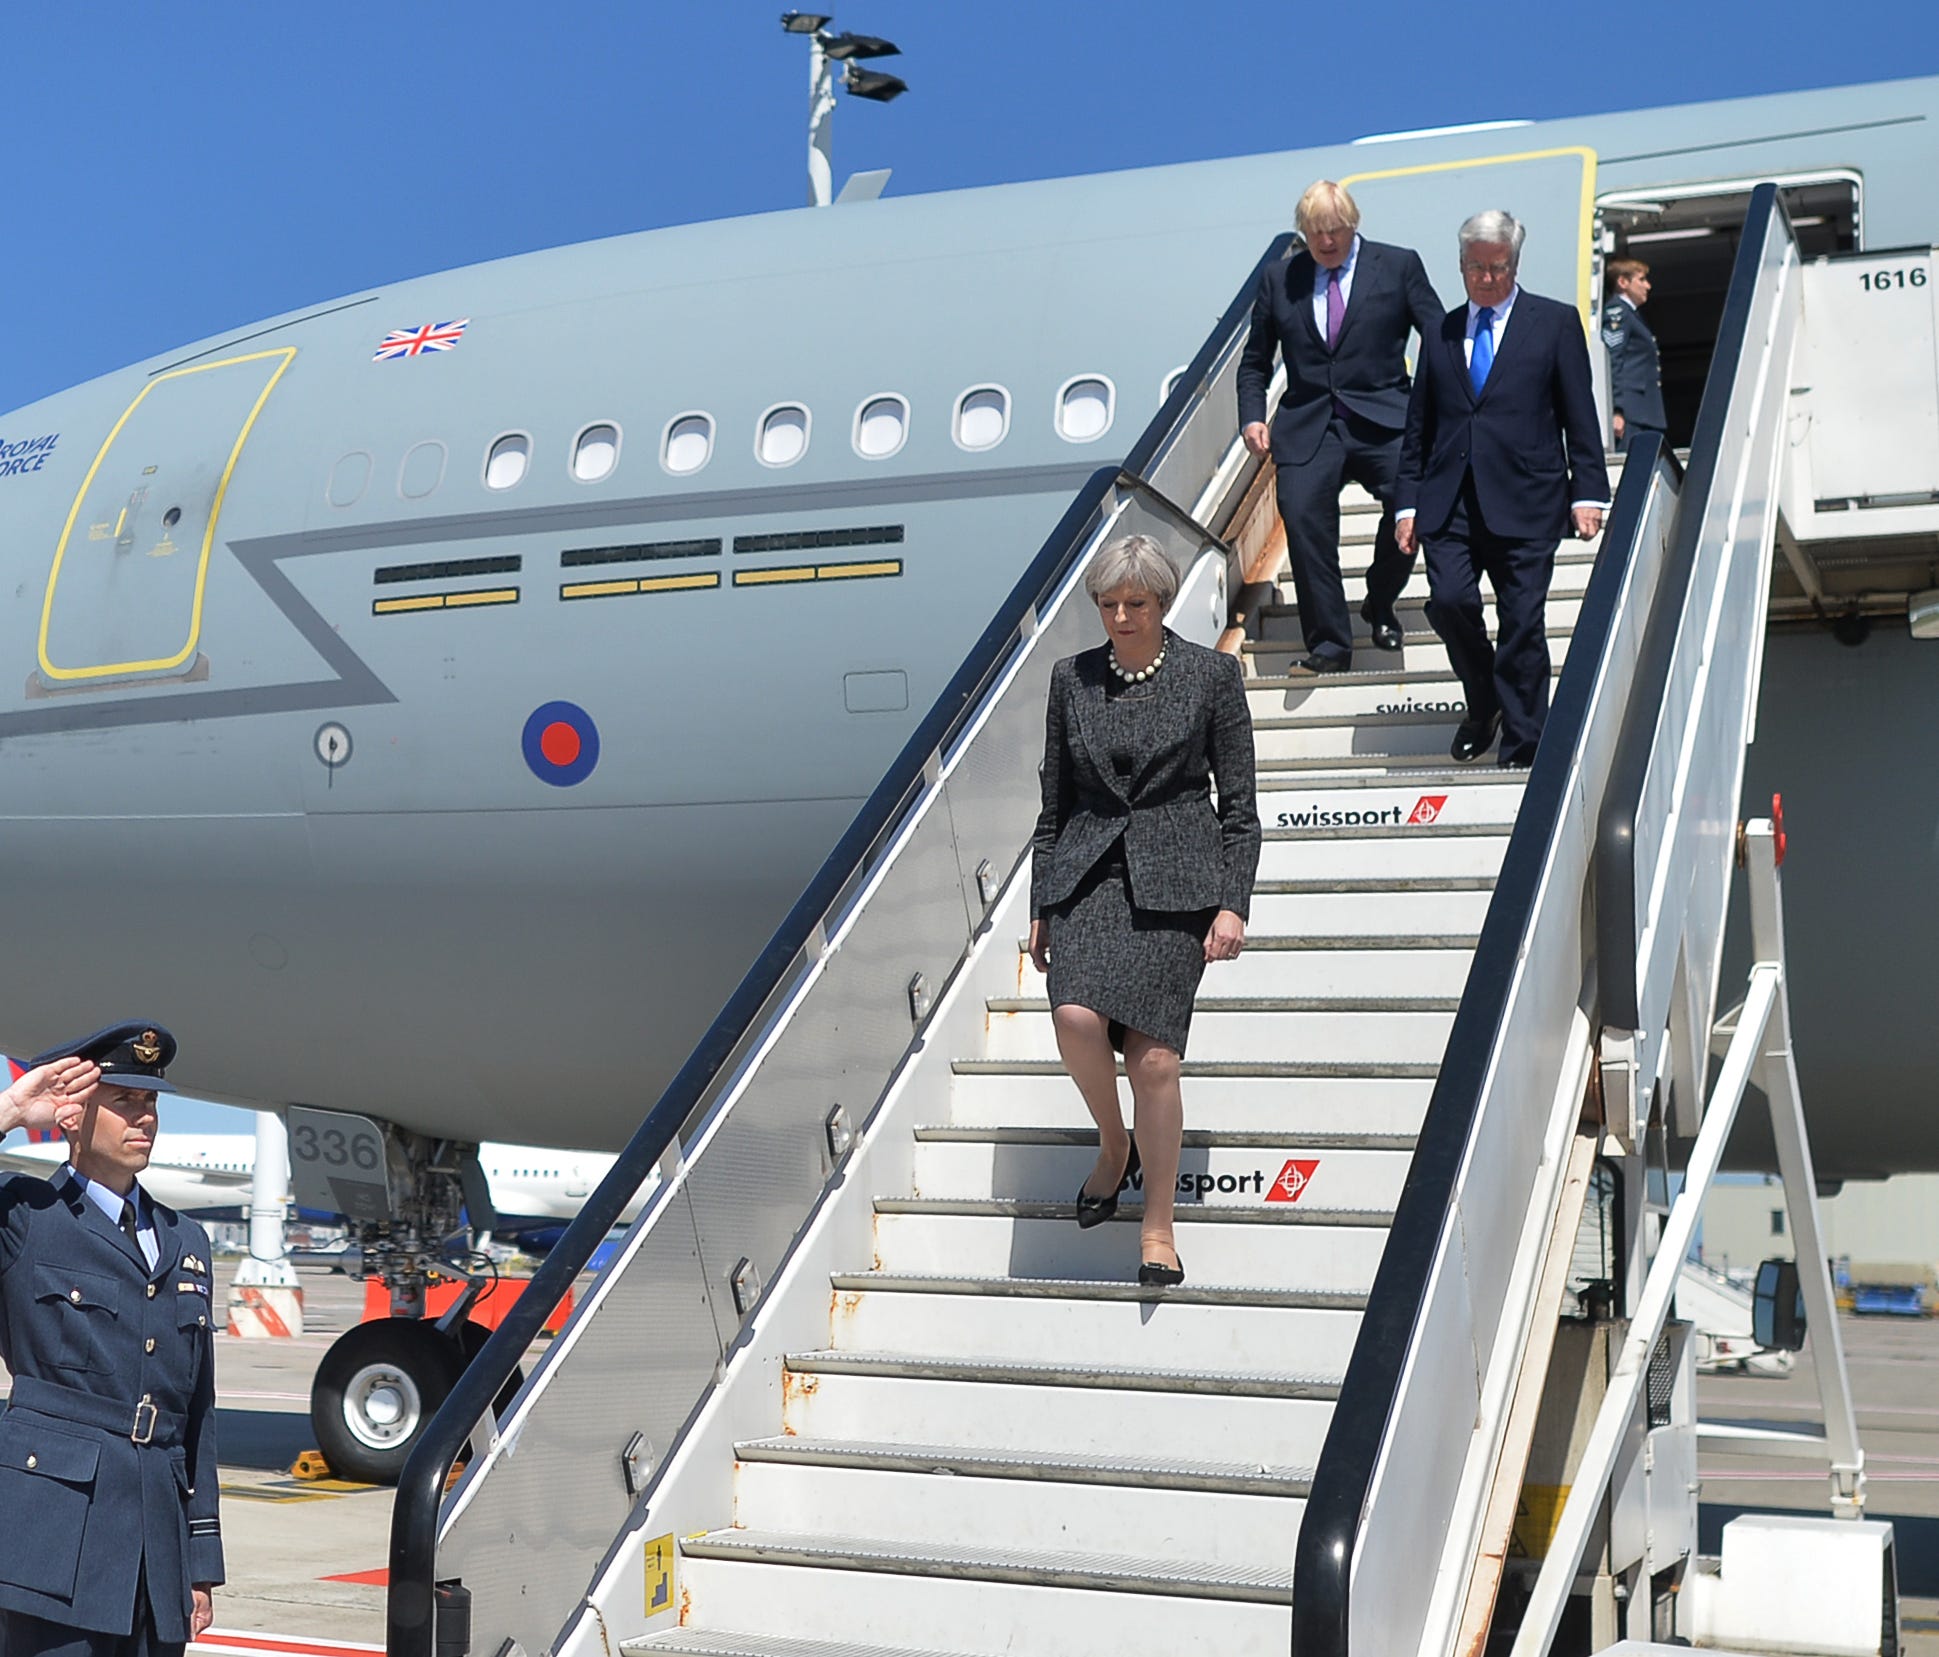 British Prime Minister Theresa May uses a $250 million Airbus A330 owned by the British Royal Air Force. Here, May disembarks a plane in Brussels, Belgium on May 25, 2017.